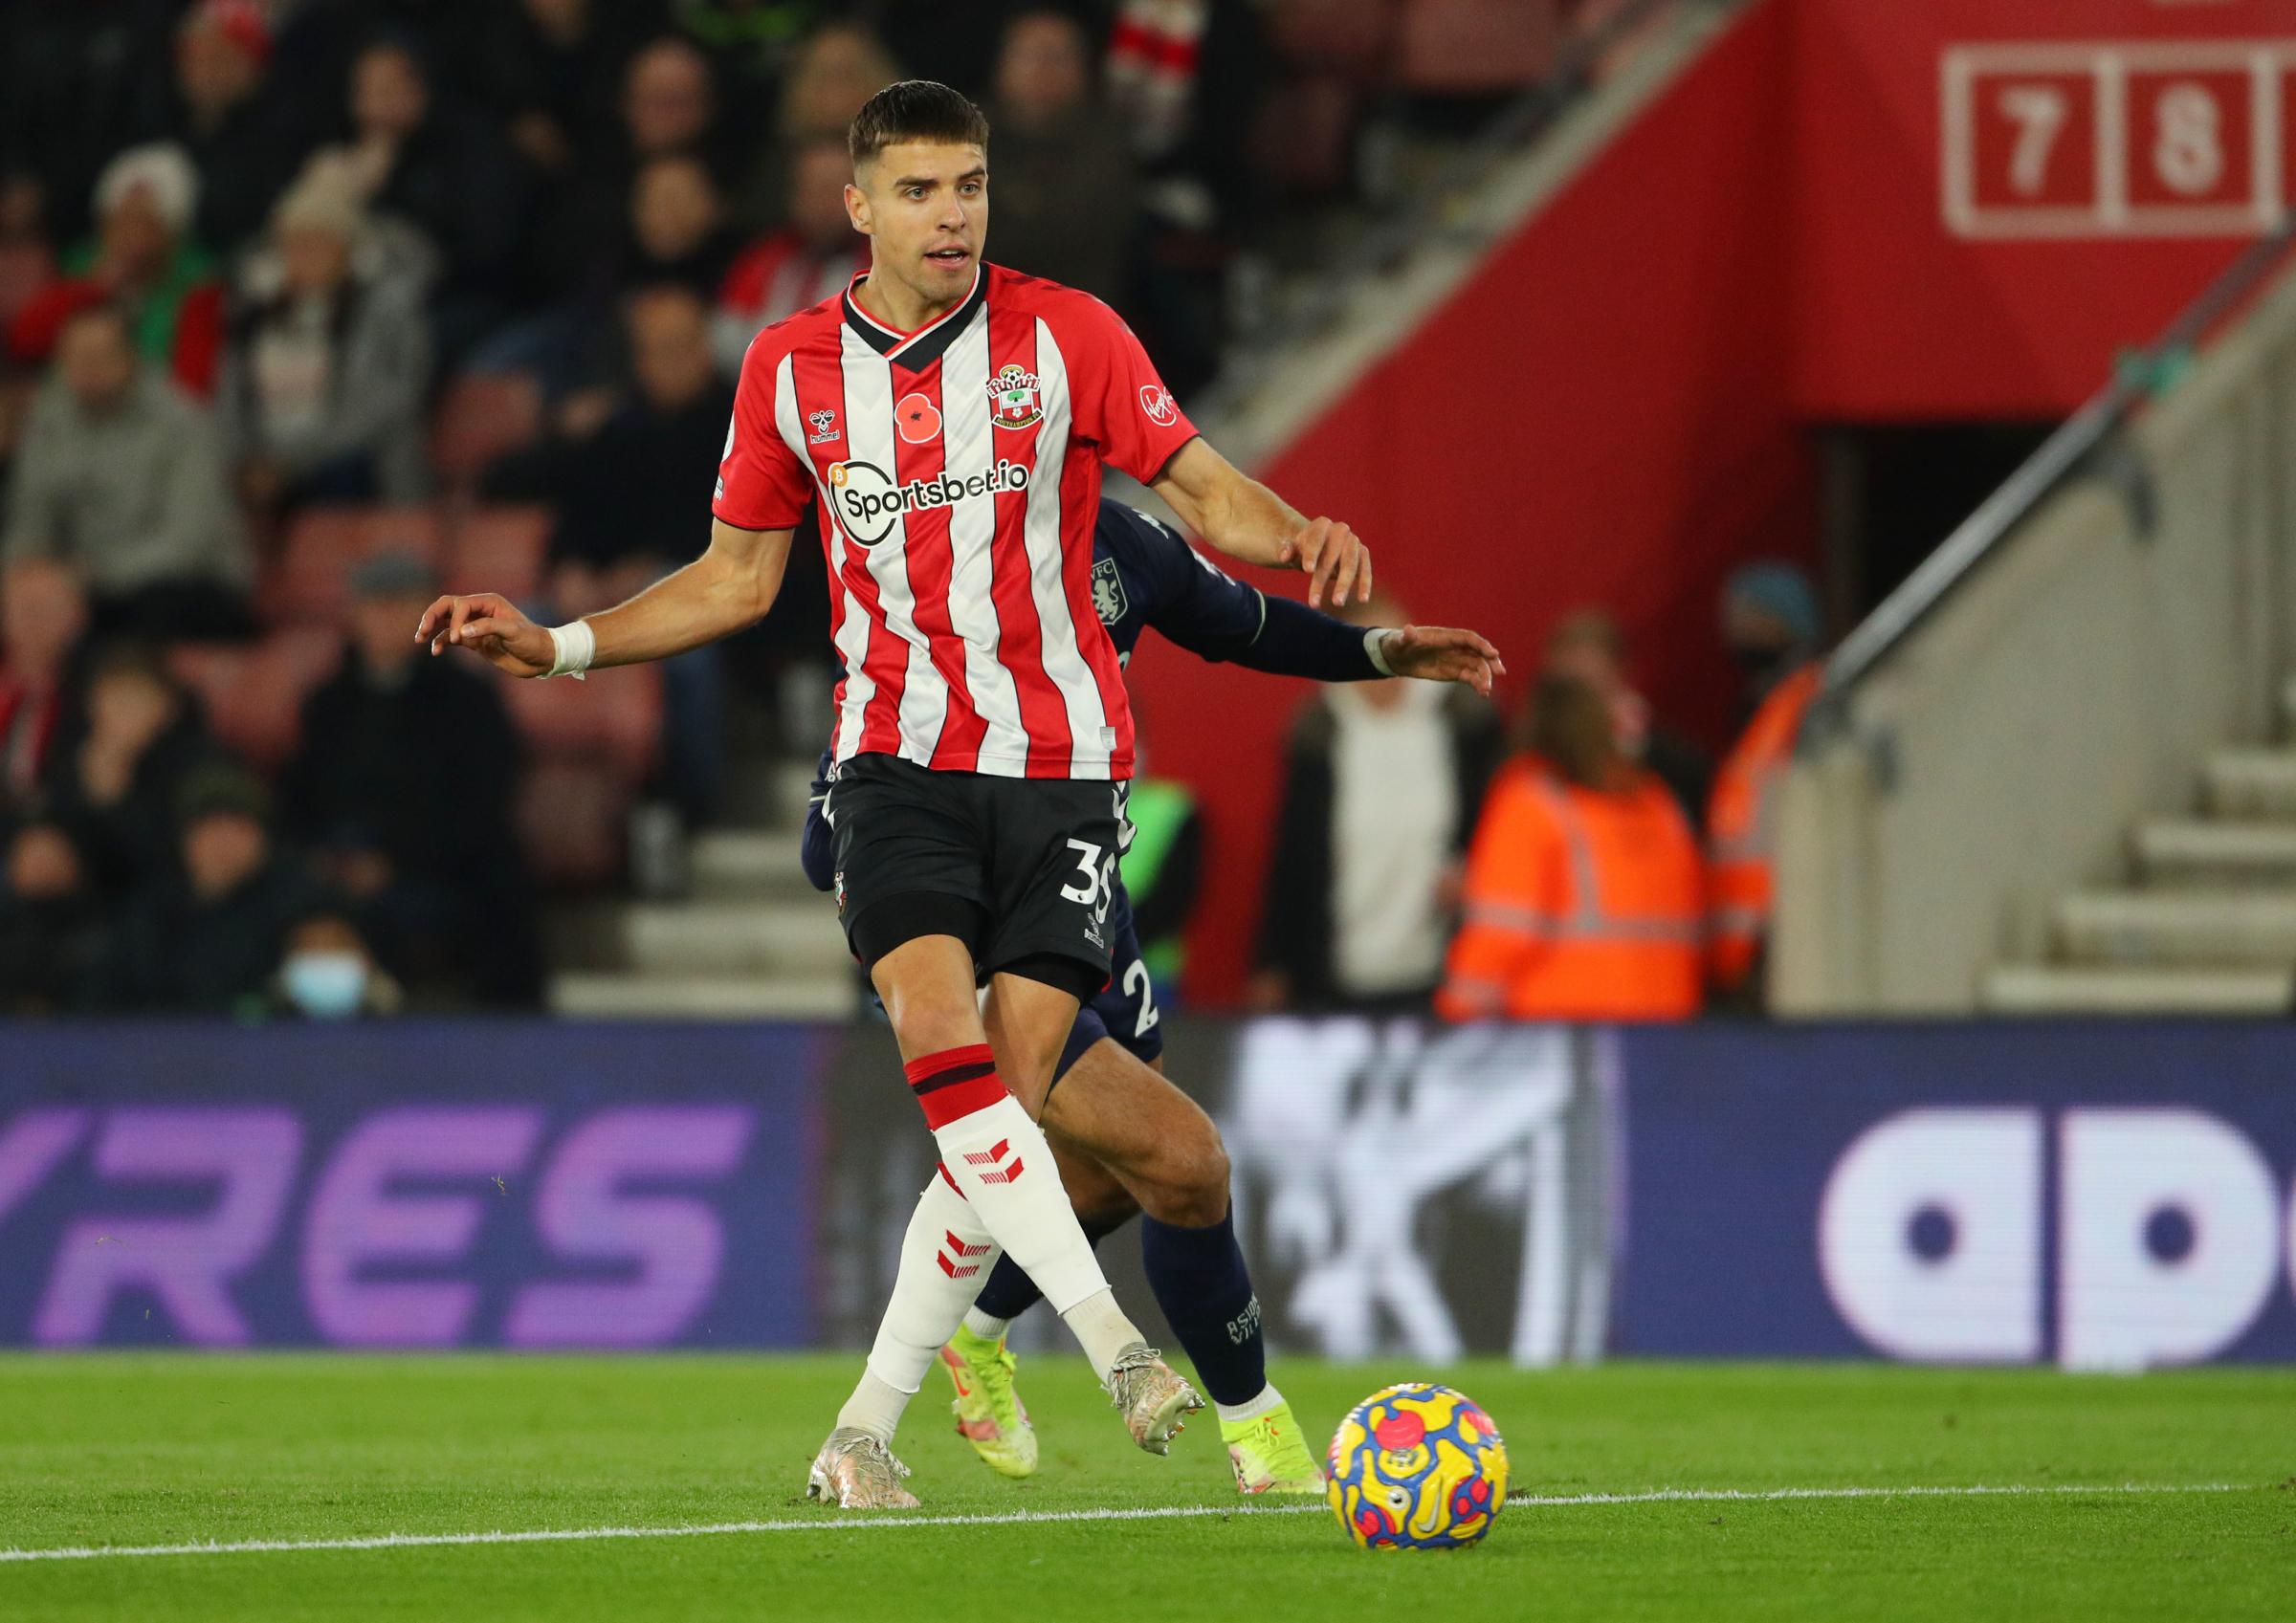 Bednarek reportedly wants to leave Saints, with Italian clubs linked